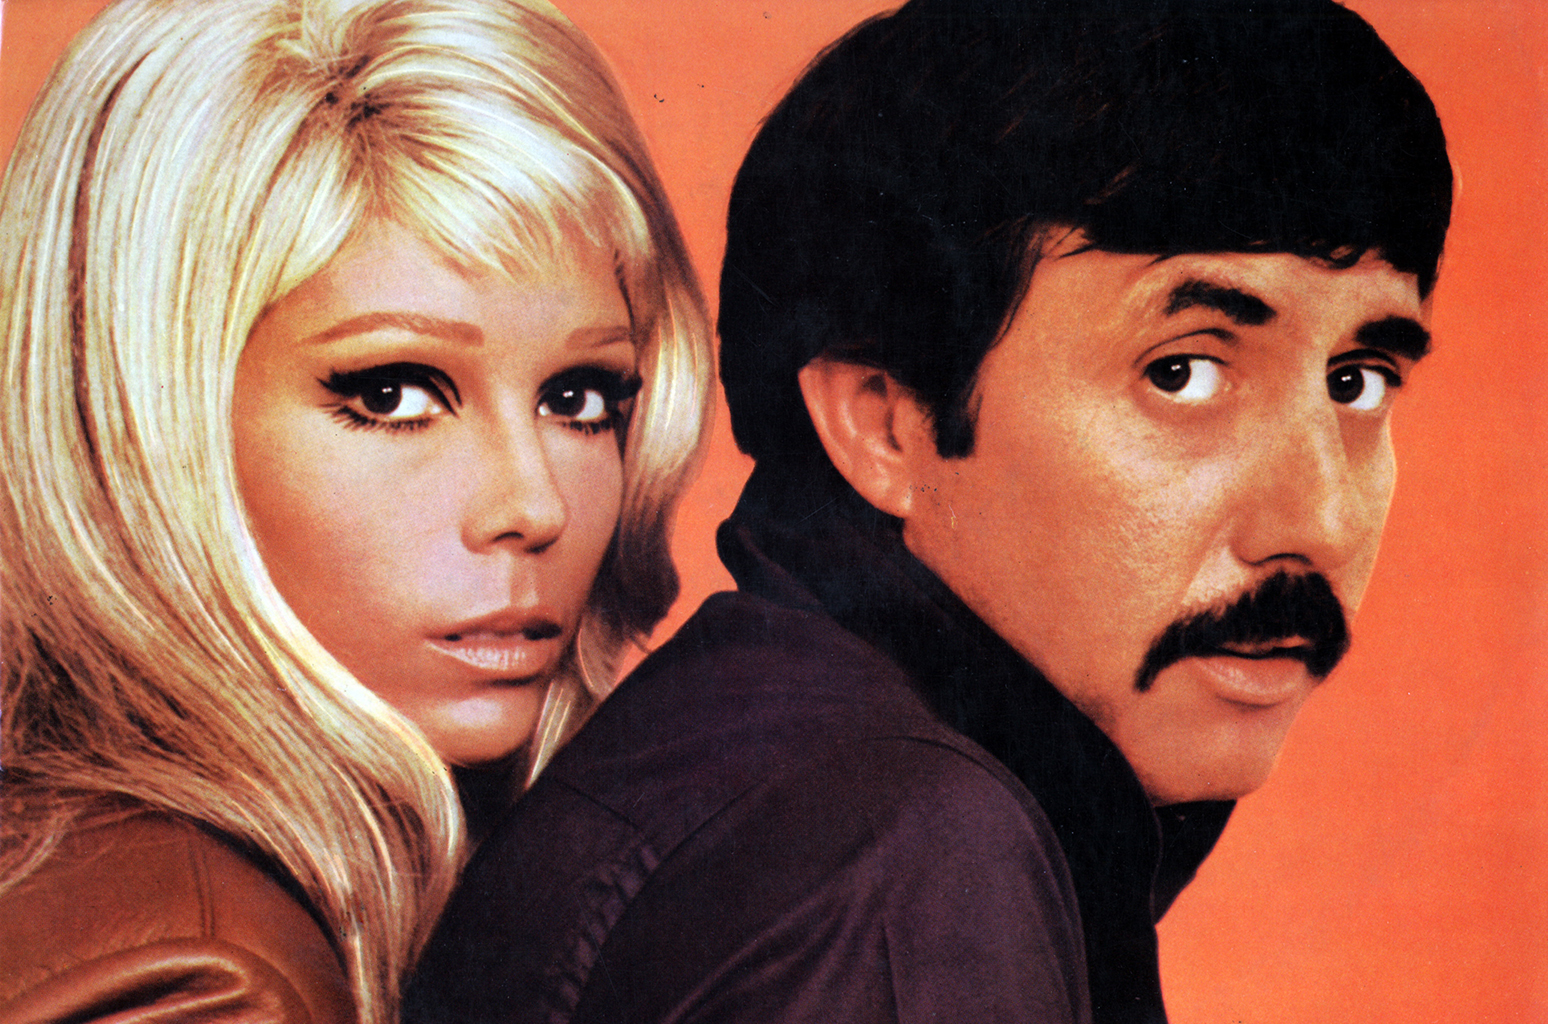 UNSPECIFIED - JANUARY 01: (AUSTRALIA OUT) Photo of Nancy SINATRA and Lee HAZLEWOOD; with Nancy Sinatra (Photo by GAB Archive/Redferns)